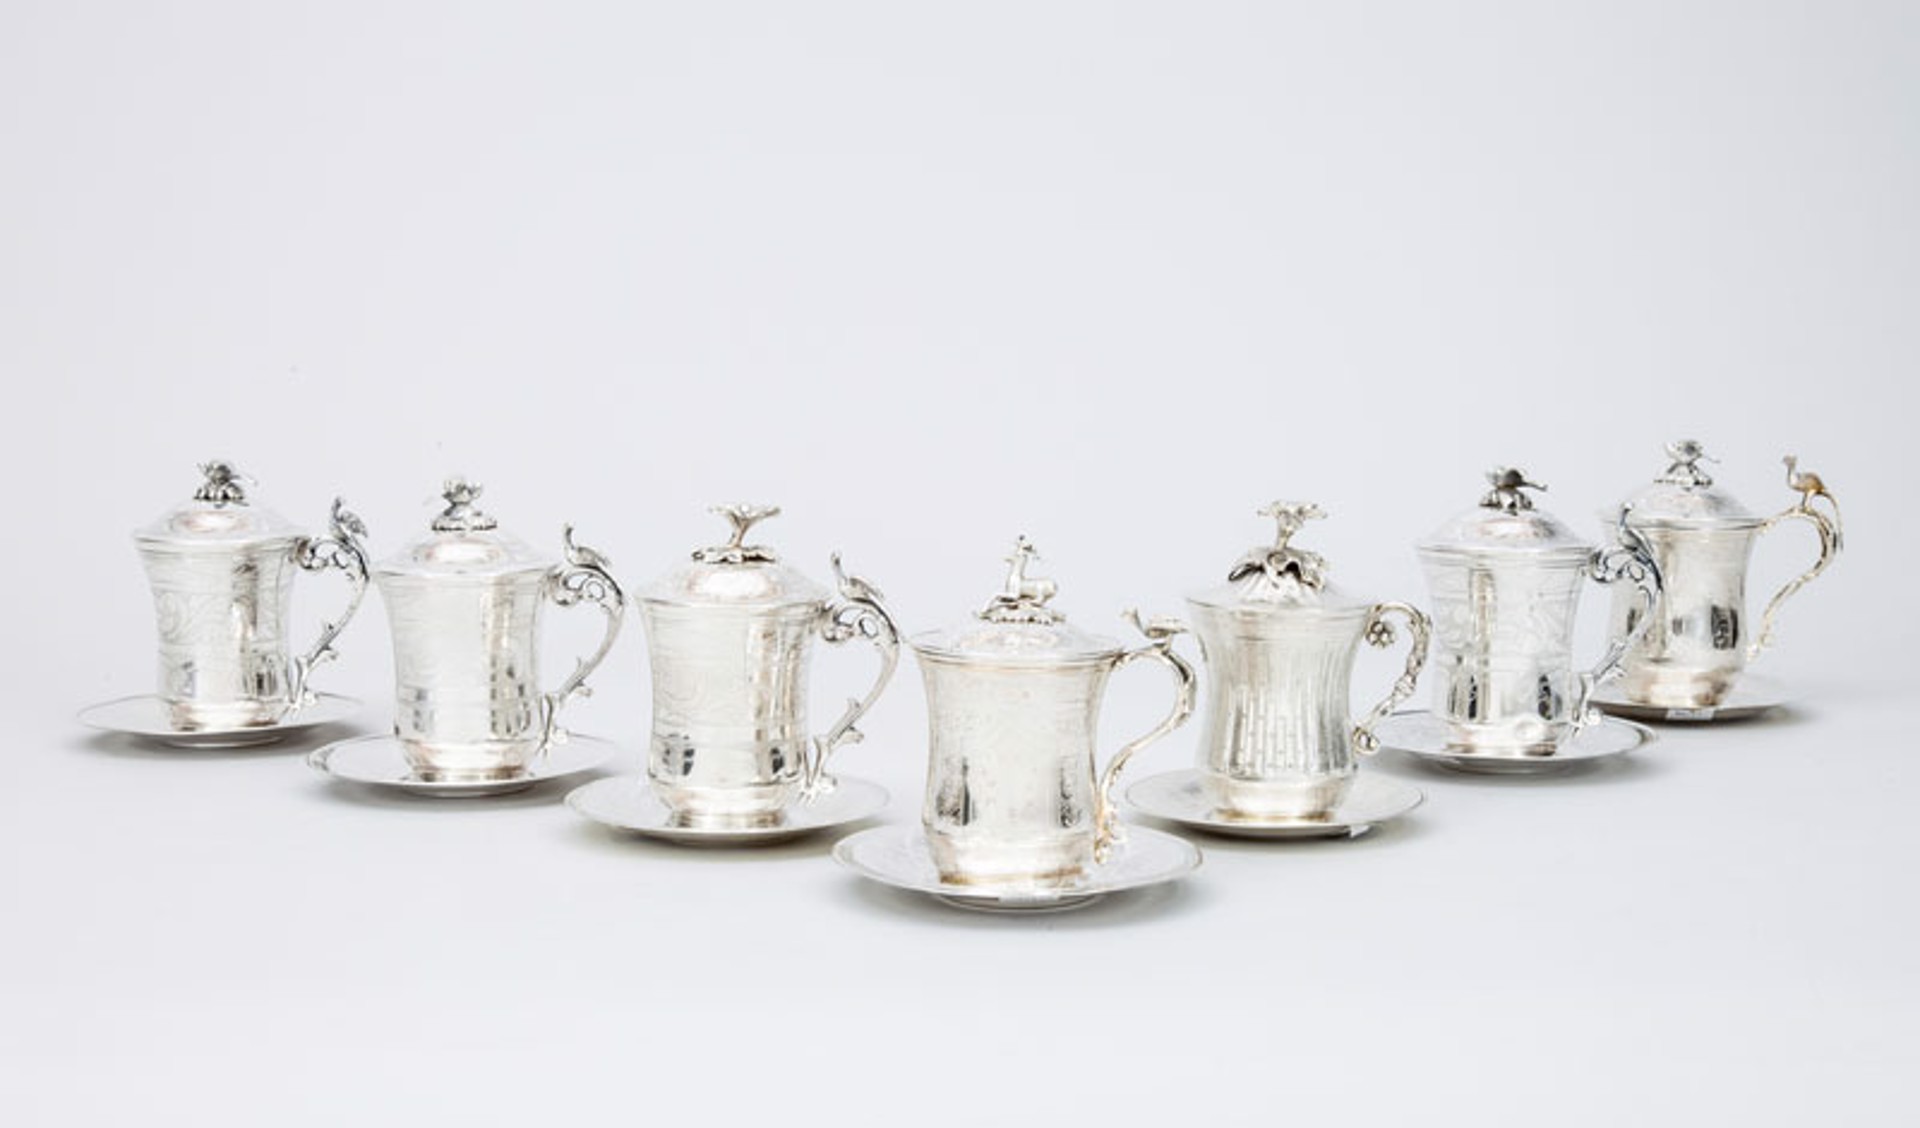 GROUP OF SEVEN STERLING SILVER TANKARDS WITH LIDS AND SAUCERS